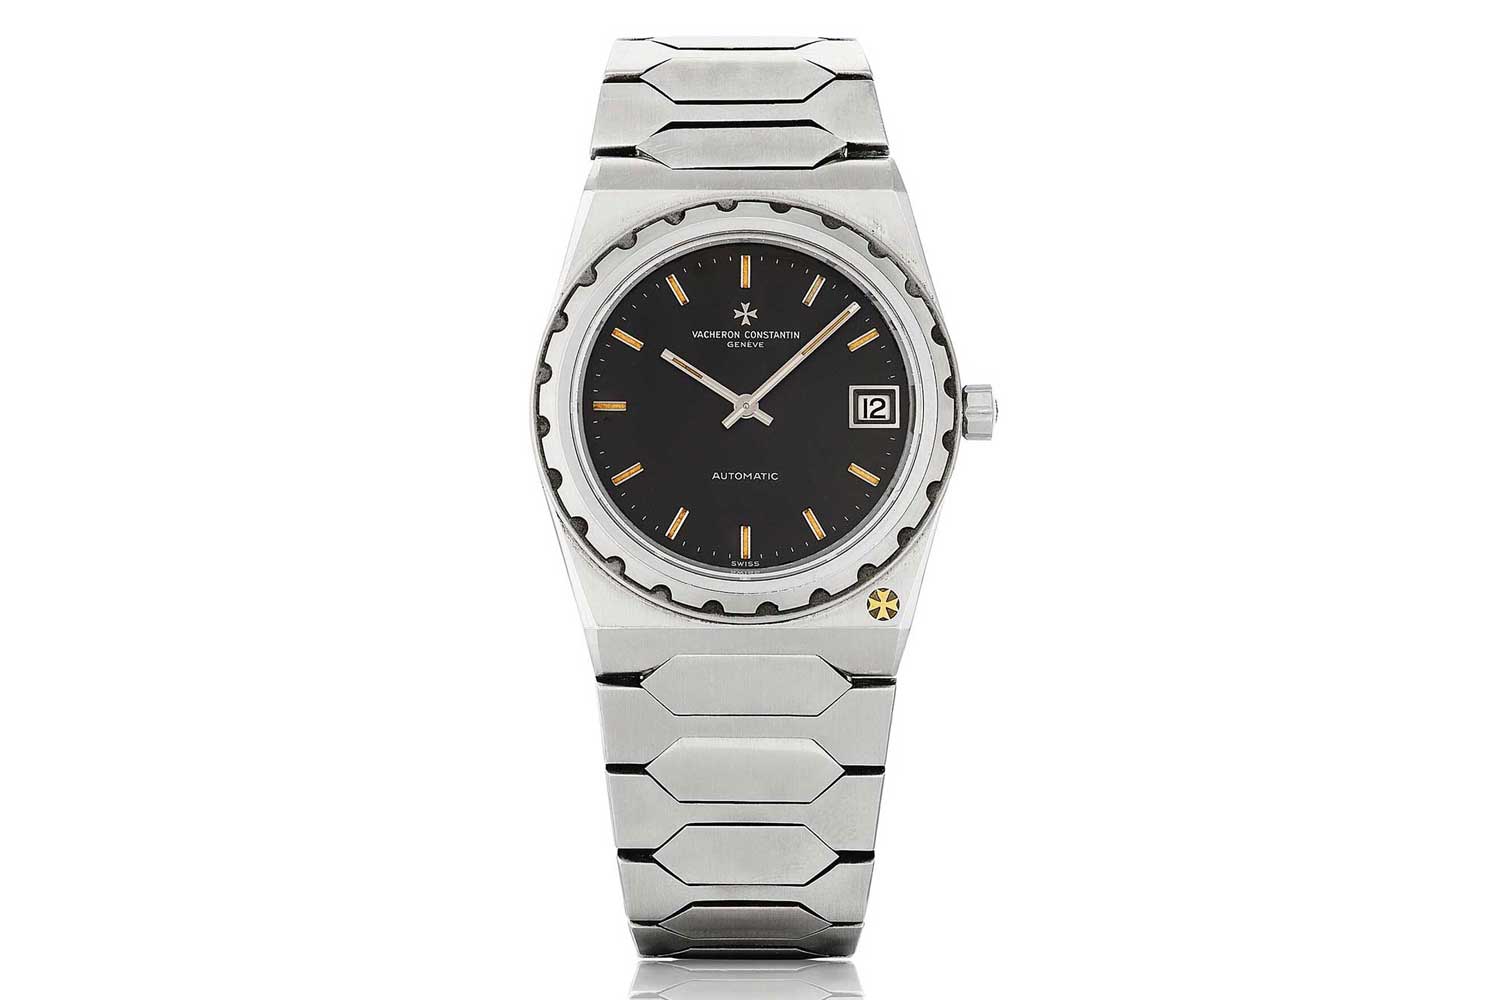 Vacheron Constantin's foray into the stainless steel sports-chic integrated bracelet watch genre was the 222, ref. 44018, designed by Jörg Hysek was launched in 1977 (Image: sothebys.com)